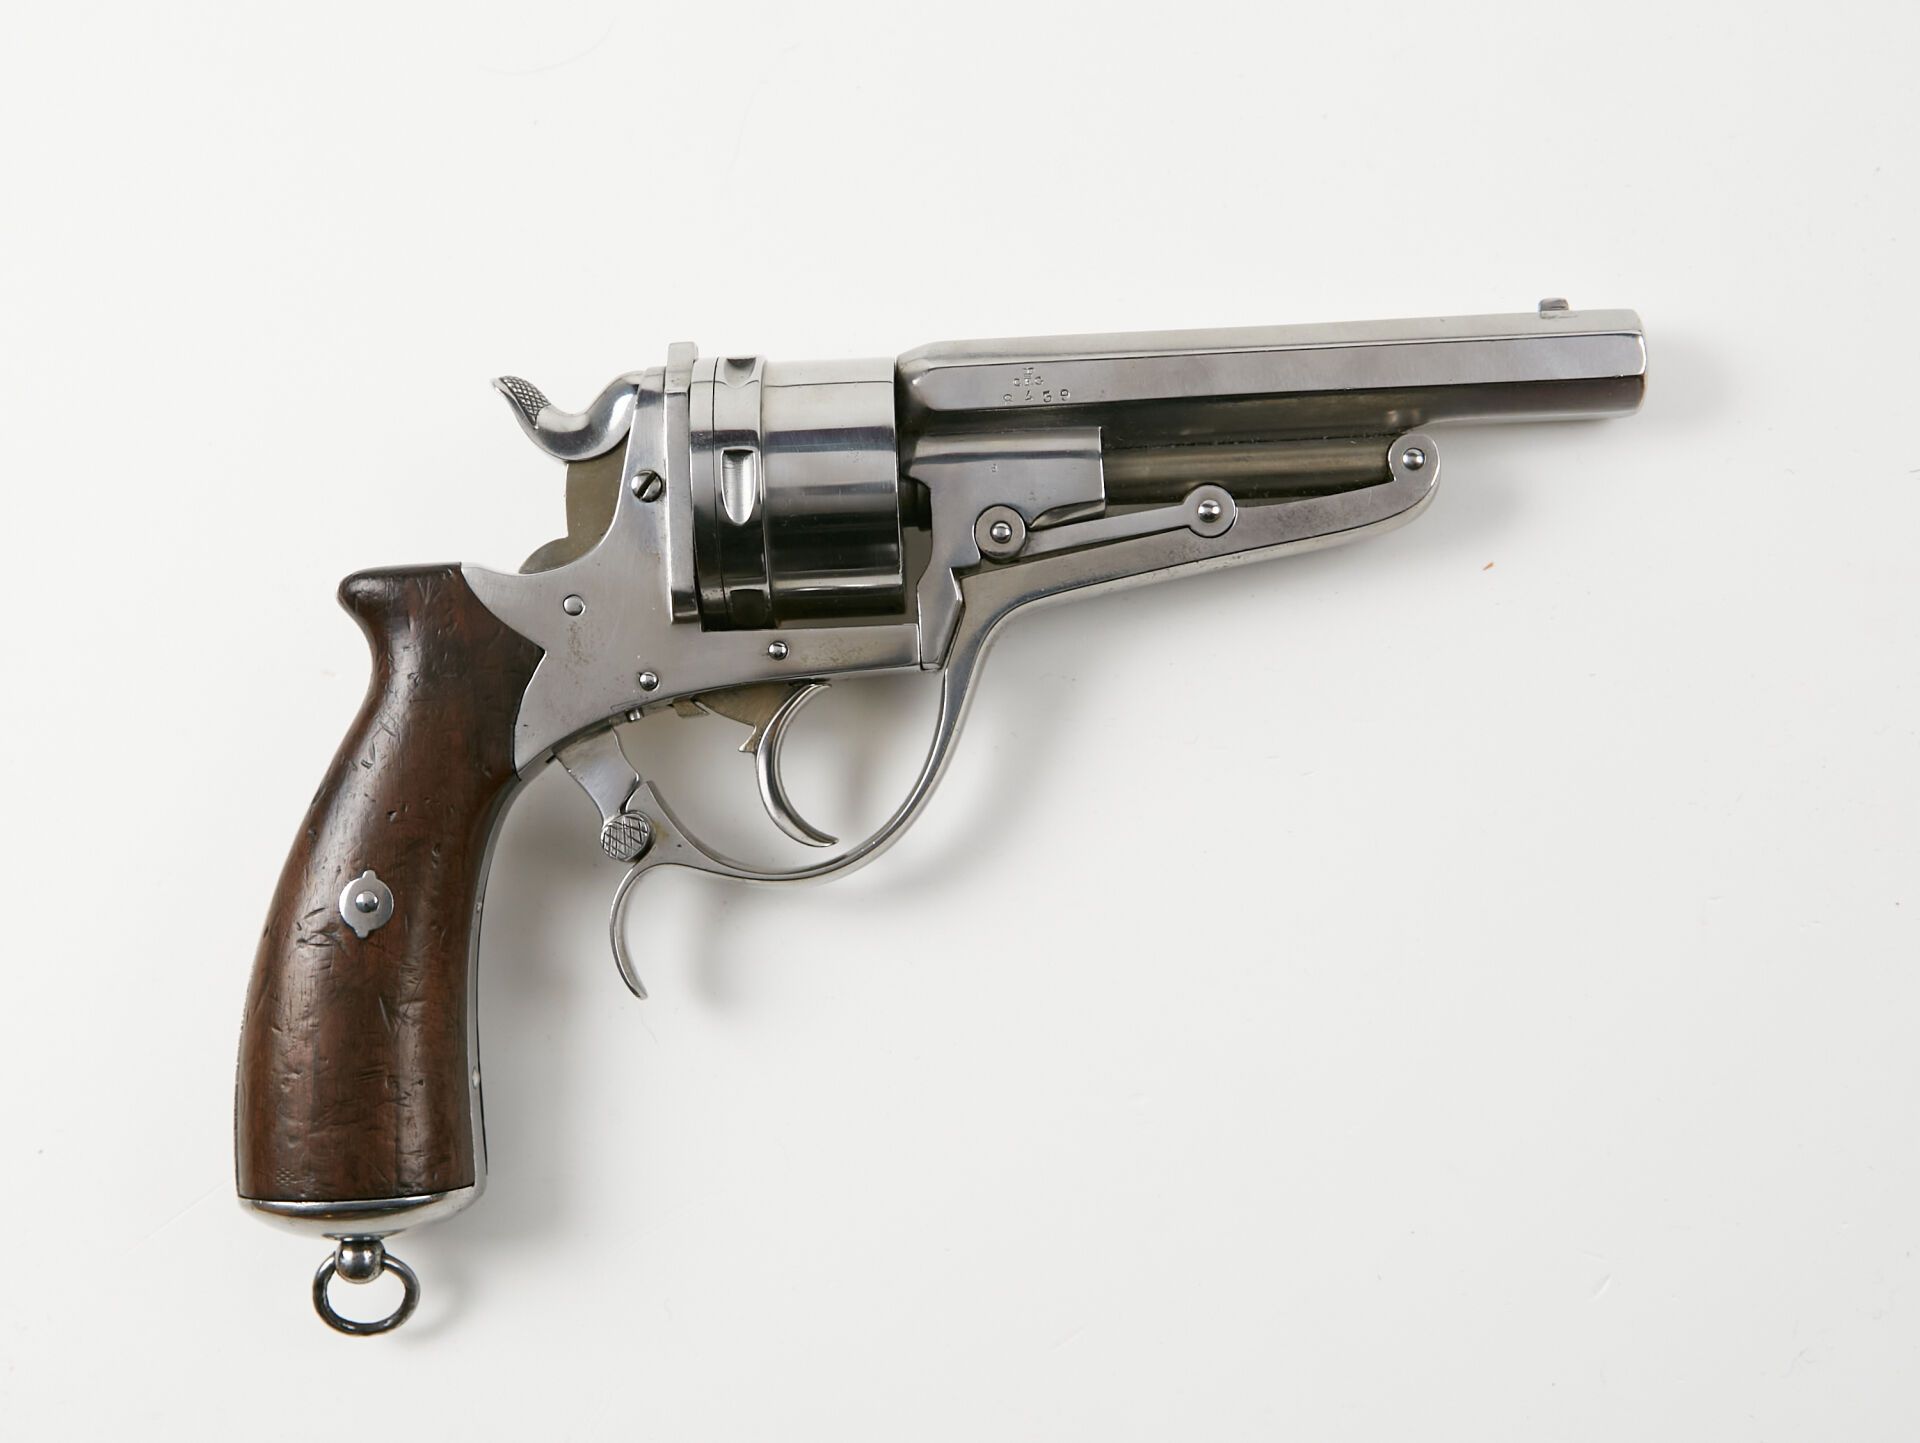 Null Galand revolver, six-shot, 11 mm caliber, double action.
Fluted barrel stam&hellip;